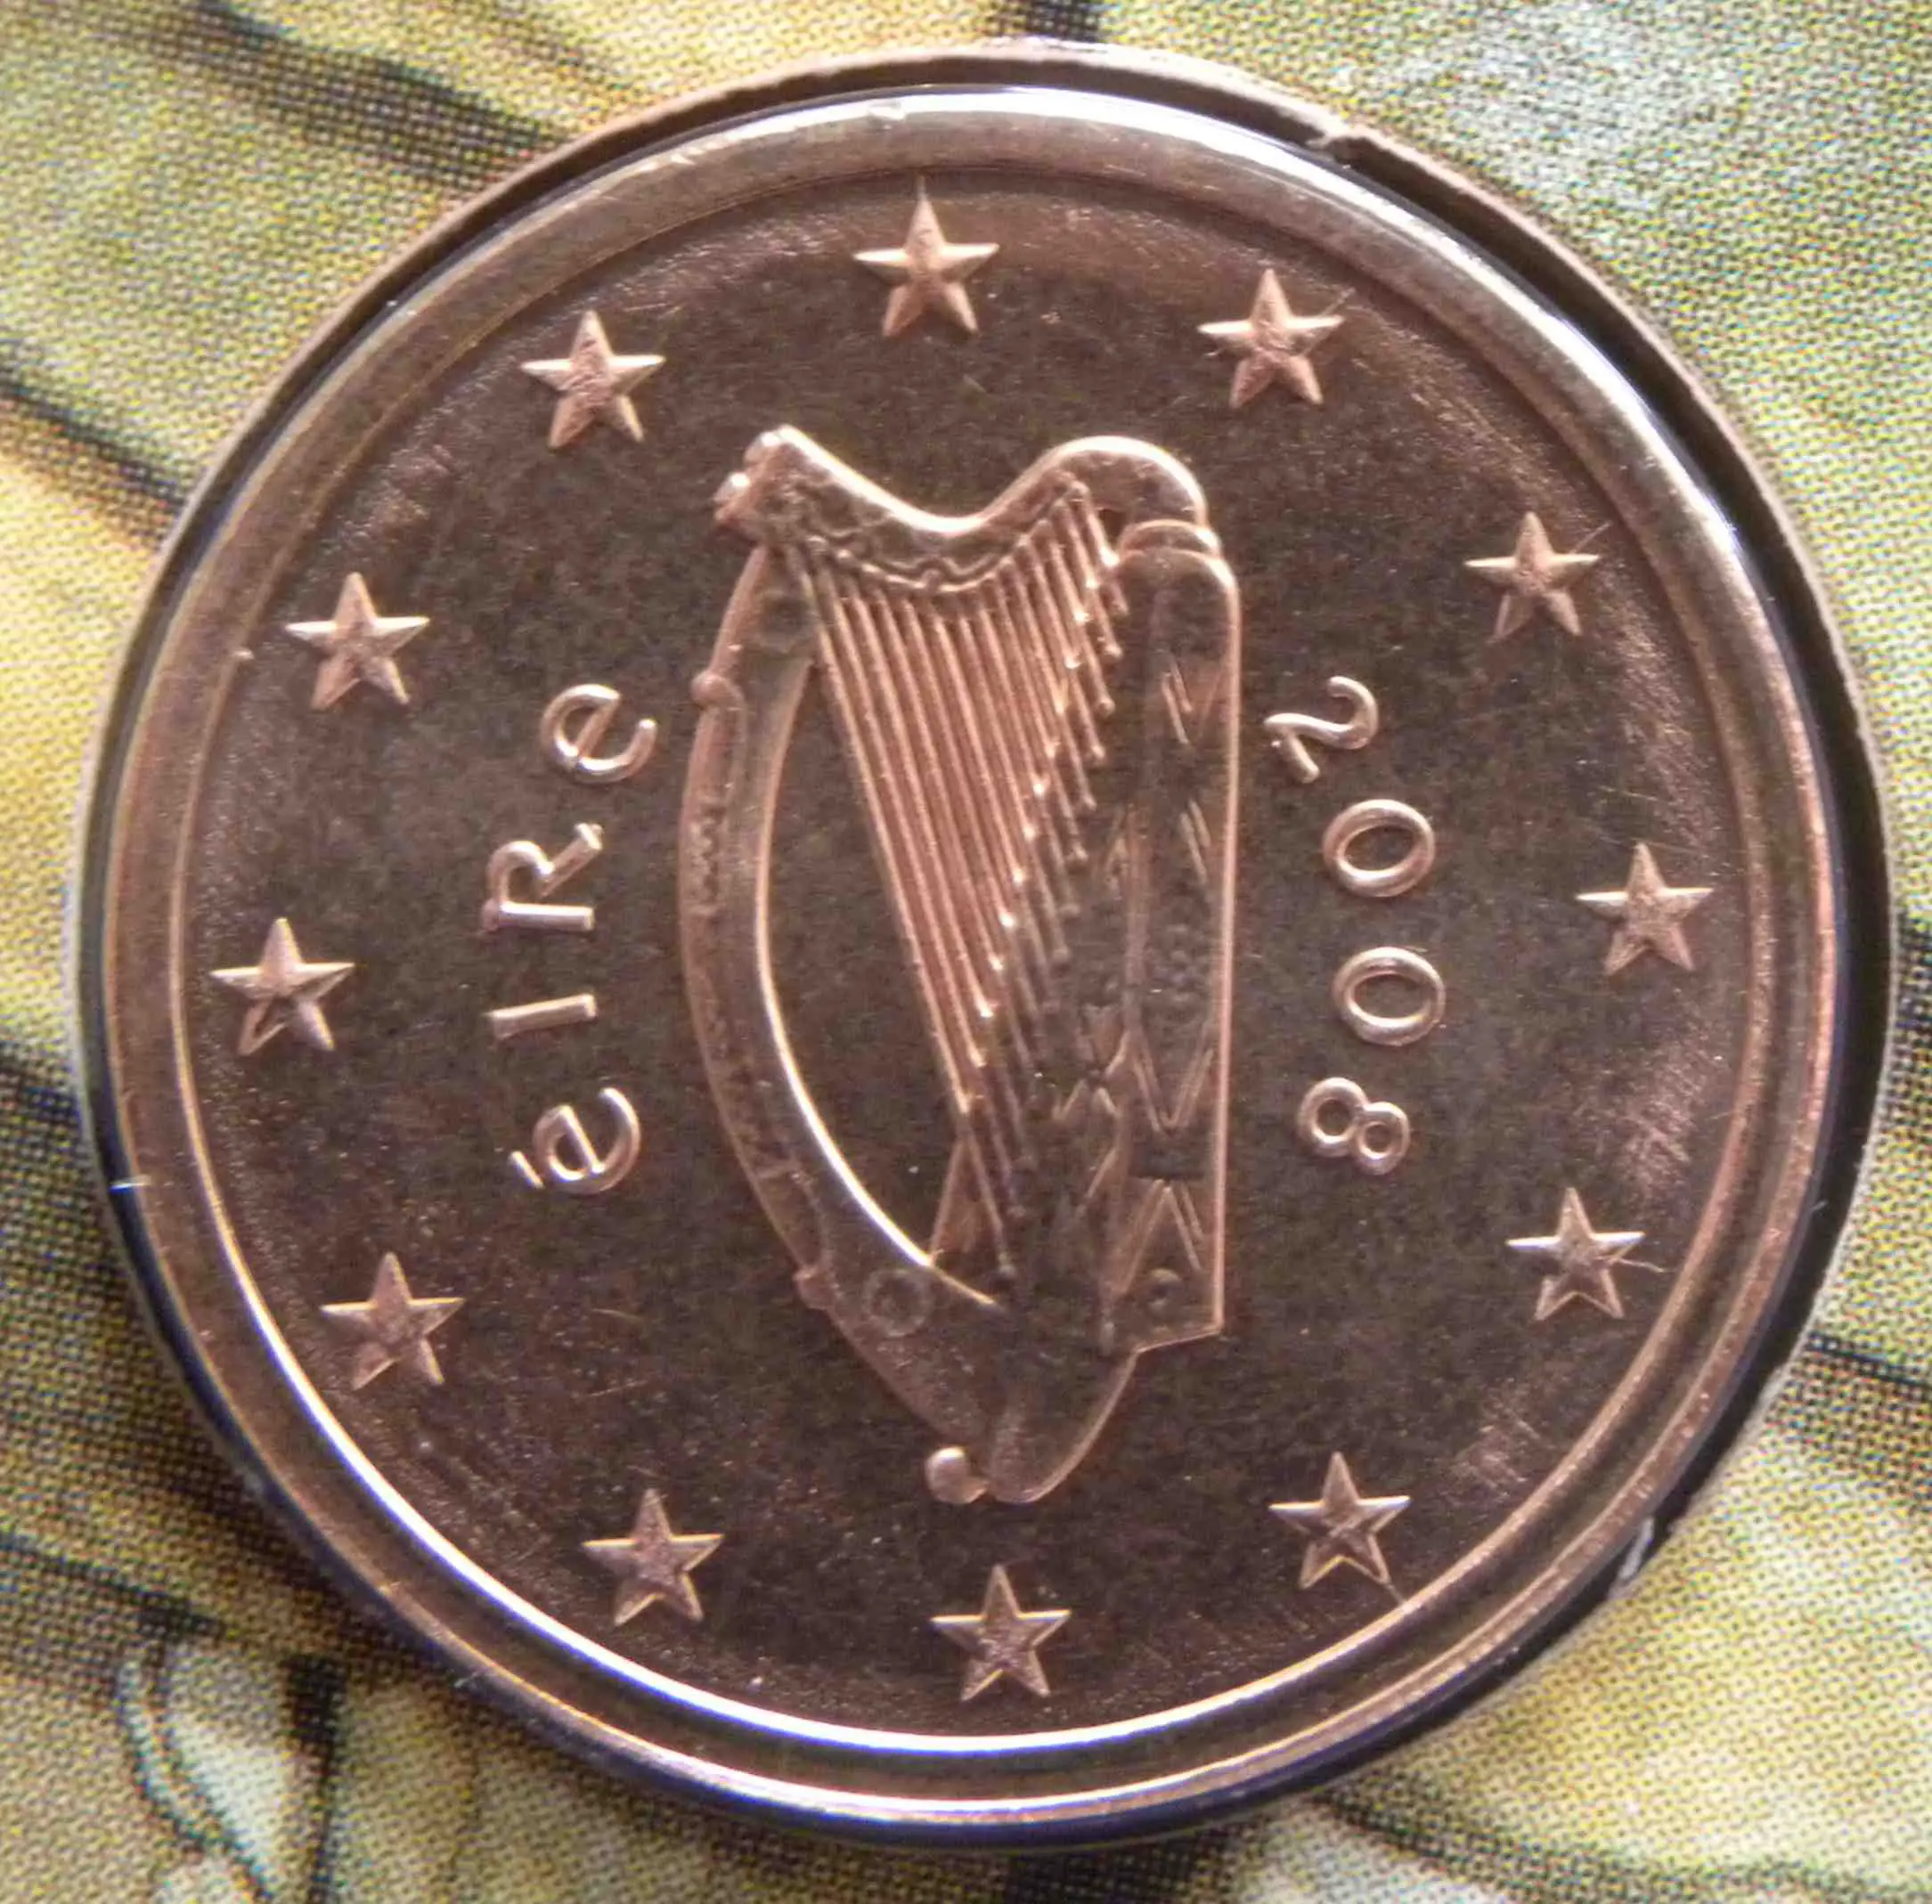 Ireland Euro Coins UNC 2008 ᐅ Value, Mintage and Images at ...